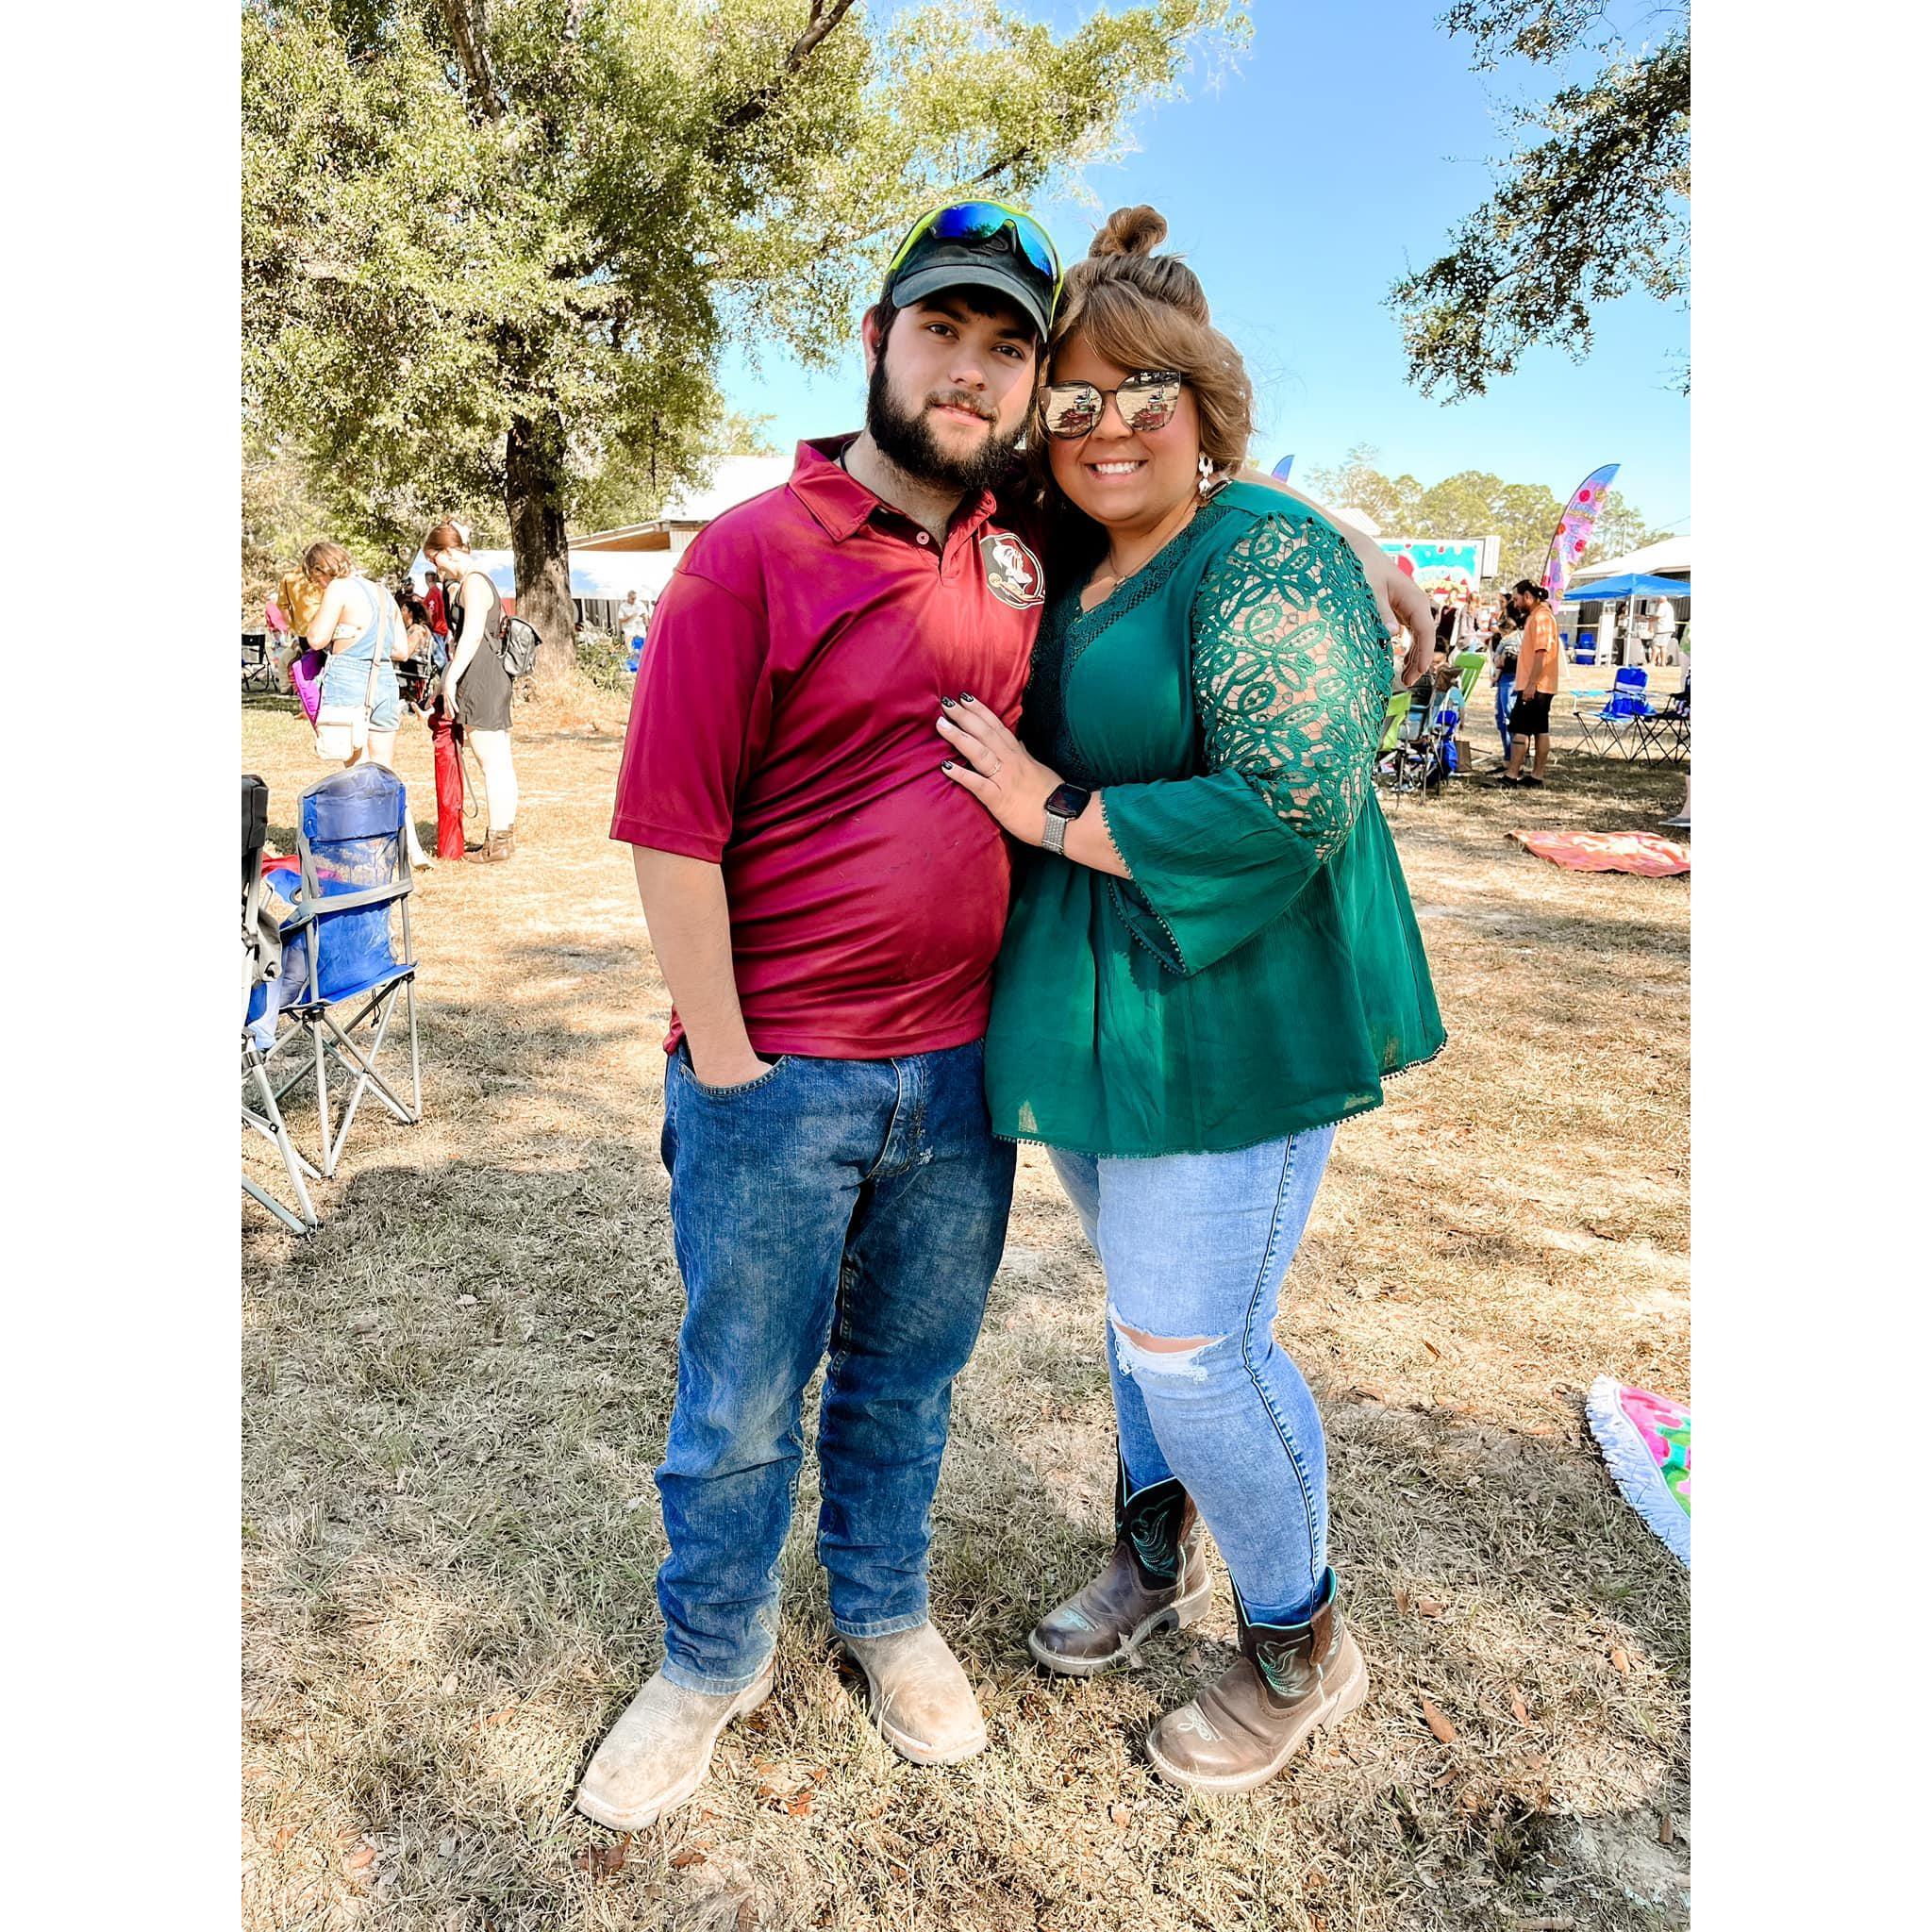 The first time we met in person at The SunflowerFestival in Vernon, FL